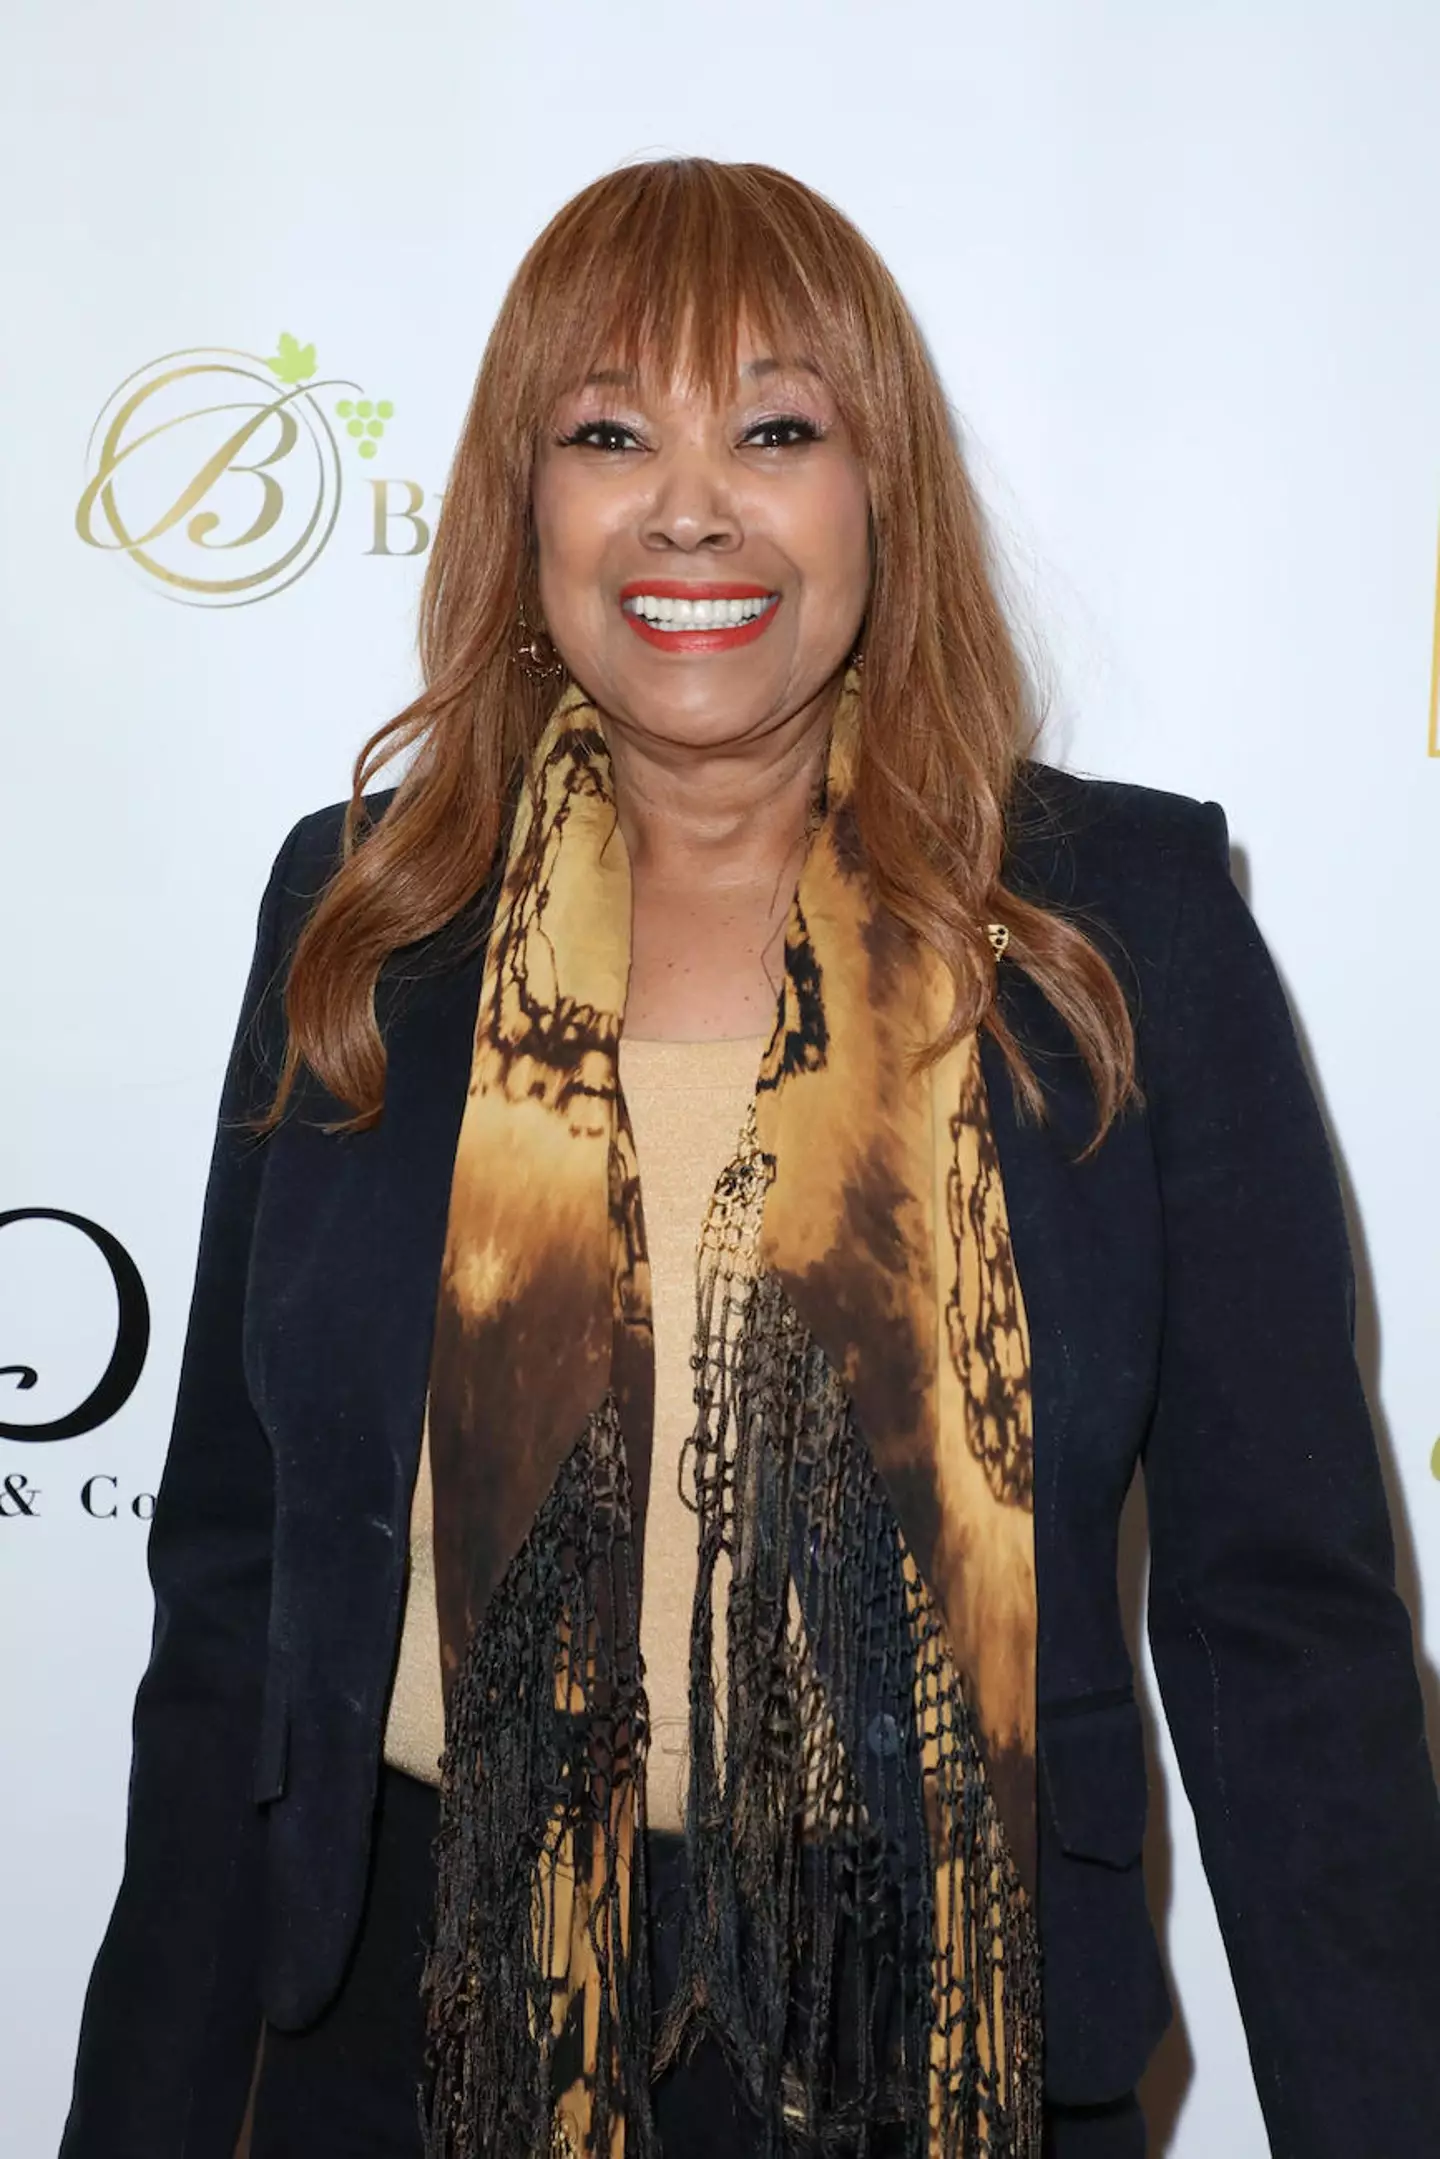 Anita Pointer from Grammy winning The Pointer Sisters has died at the age of 74.